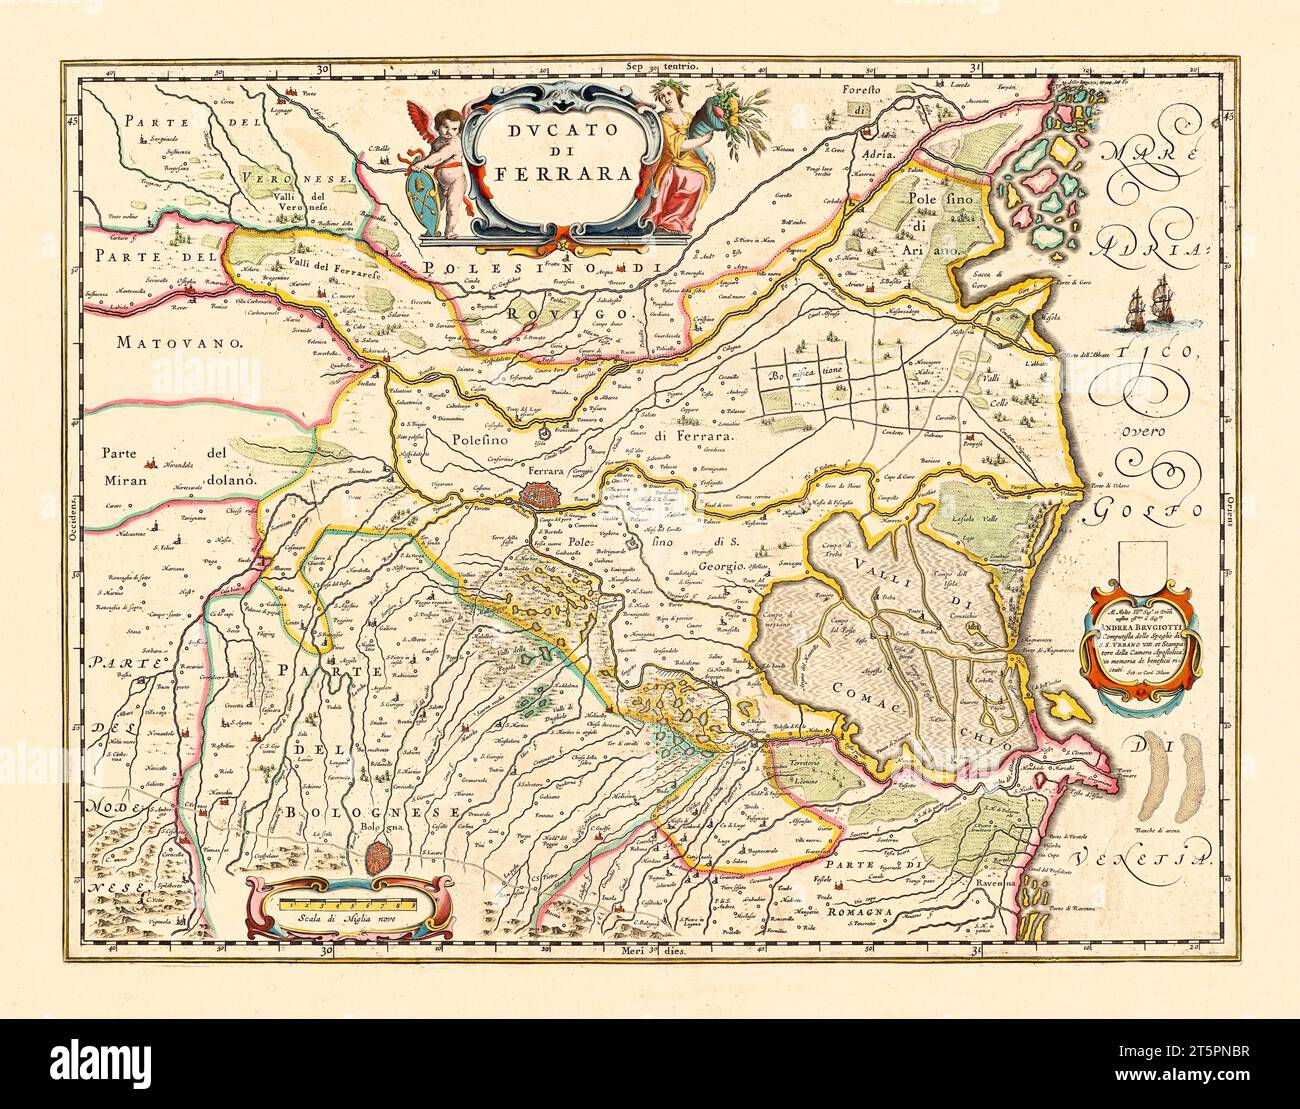 Old map of the Duchy of Ferrara, Italy. By Jansonn, publ. in 1647 Stock Photo